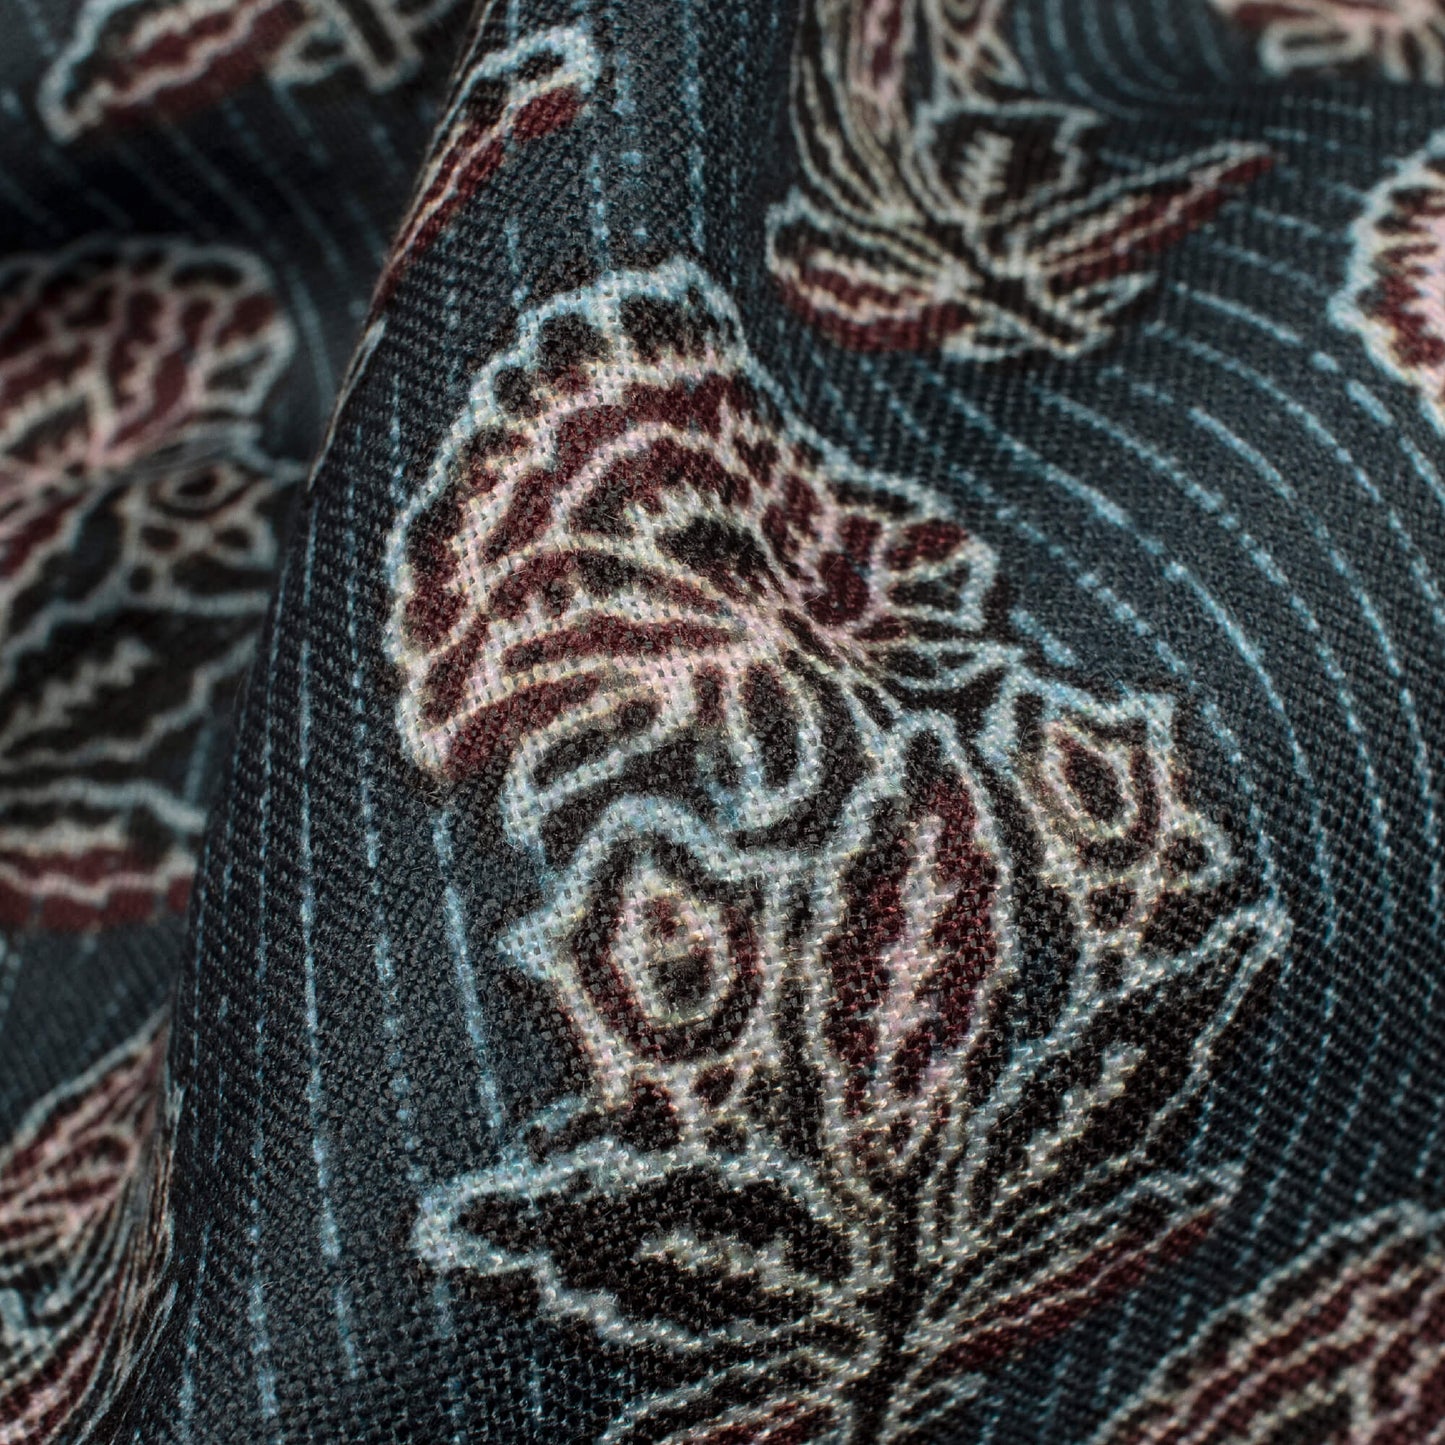 Spruce Blue And  Maroon Ajrakh Pattern Digital Print Linen Textured Fabric (Width 56 Inches)